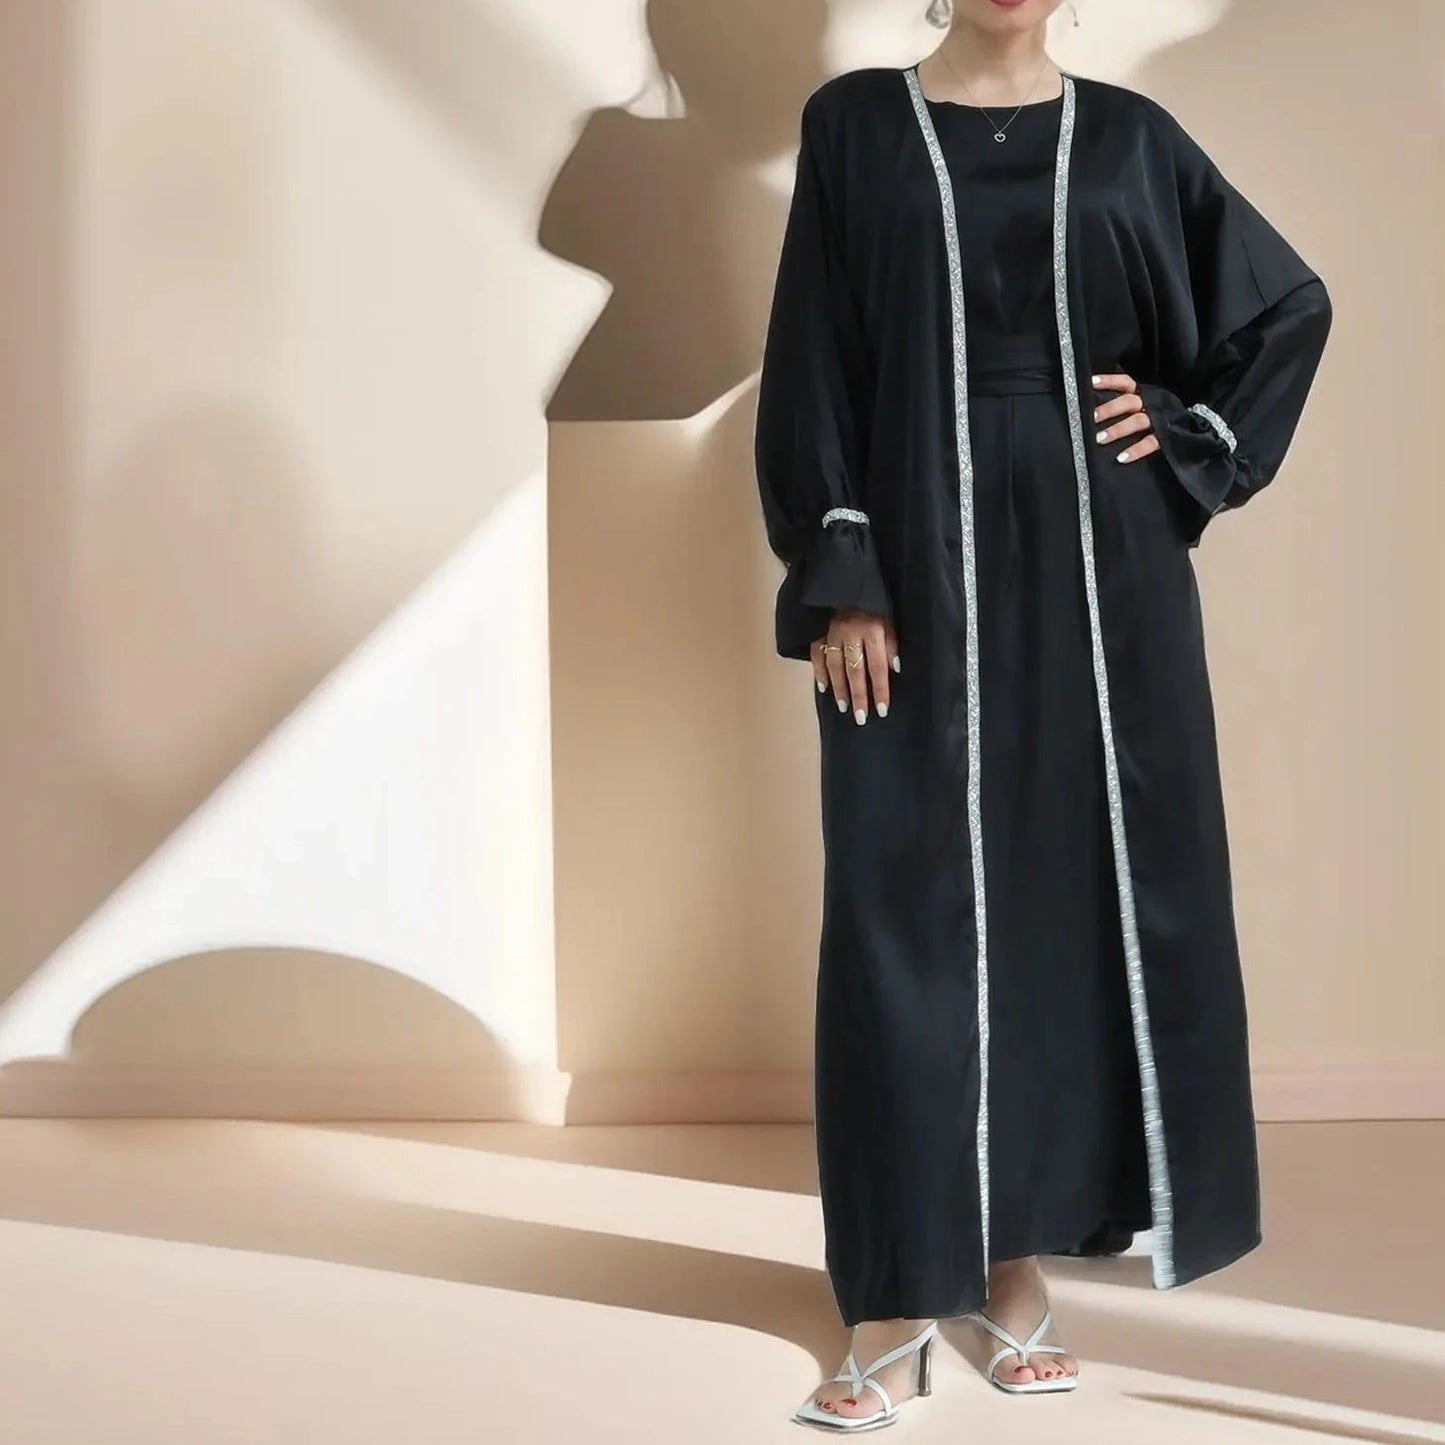 Shimmering Duo - 2 PC Abaya set with matching Inner Dress - Try Modest Limited 